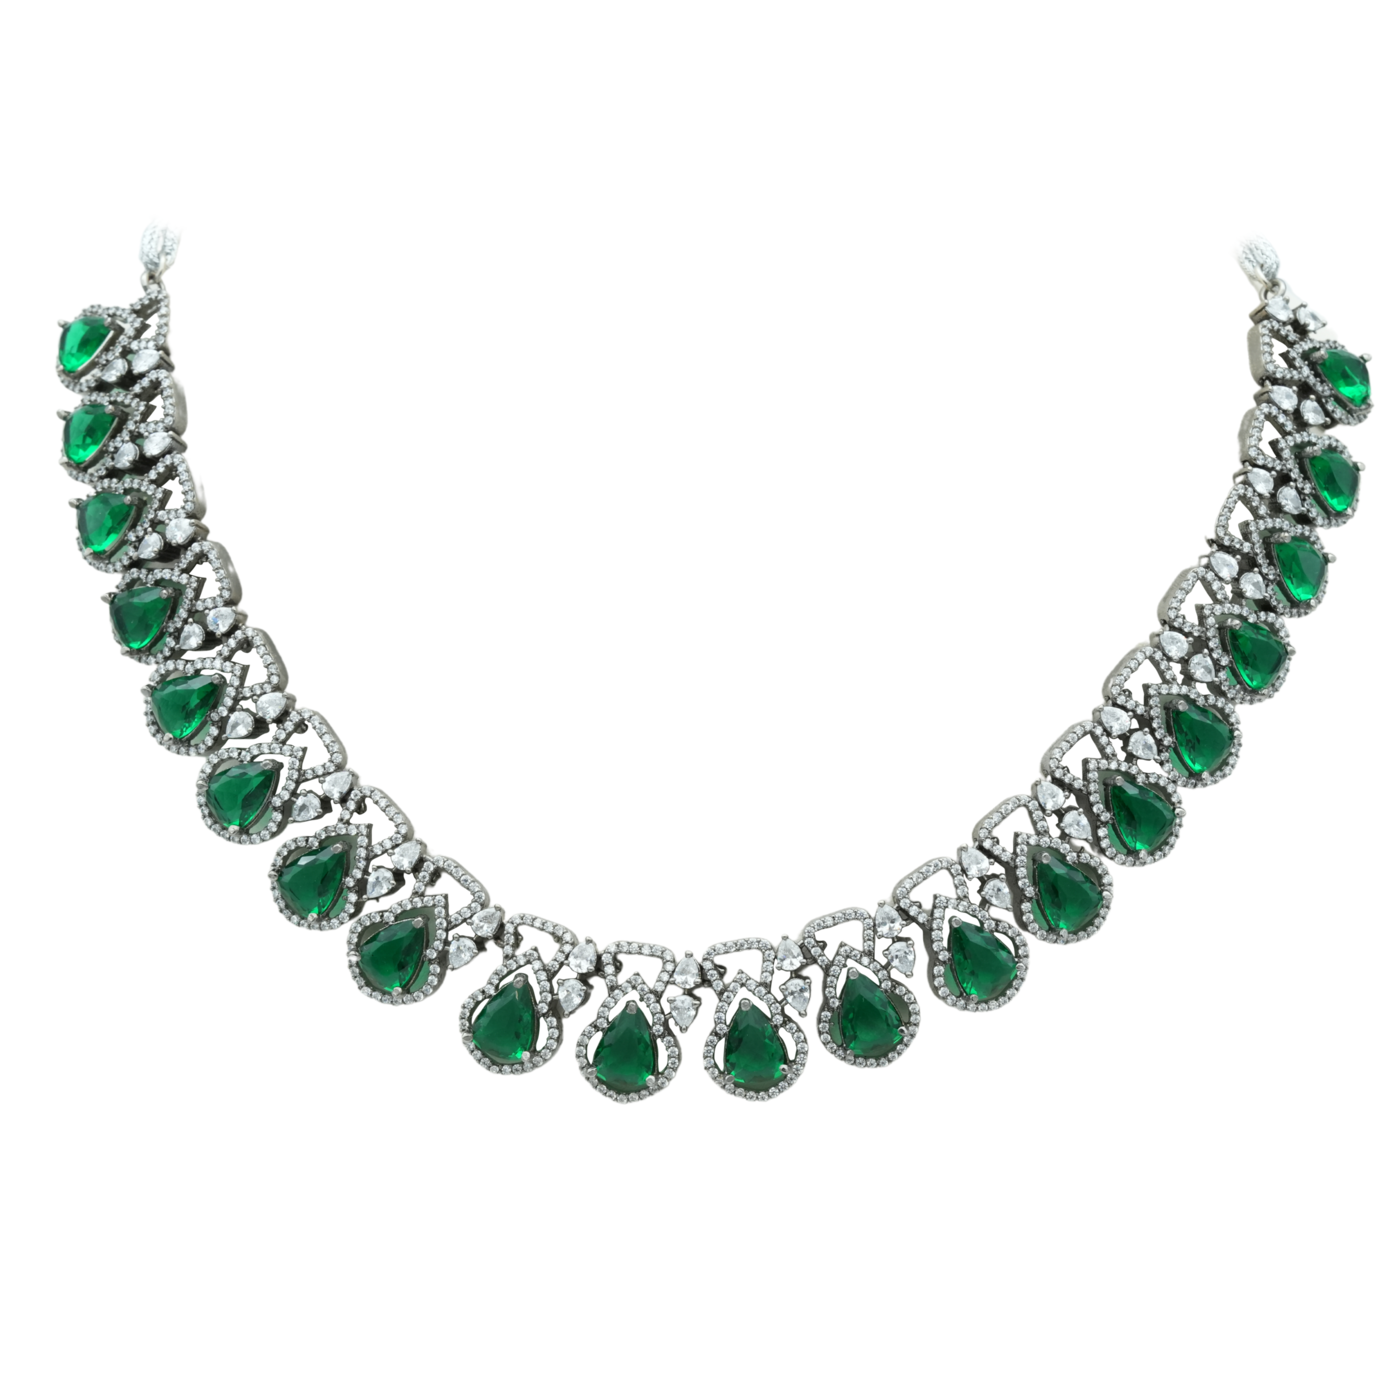 Regal set with moissanites and pear shaped emeralds